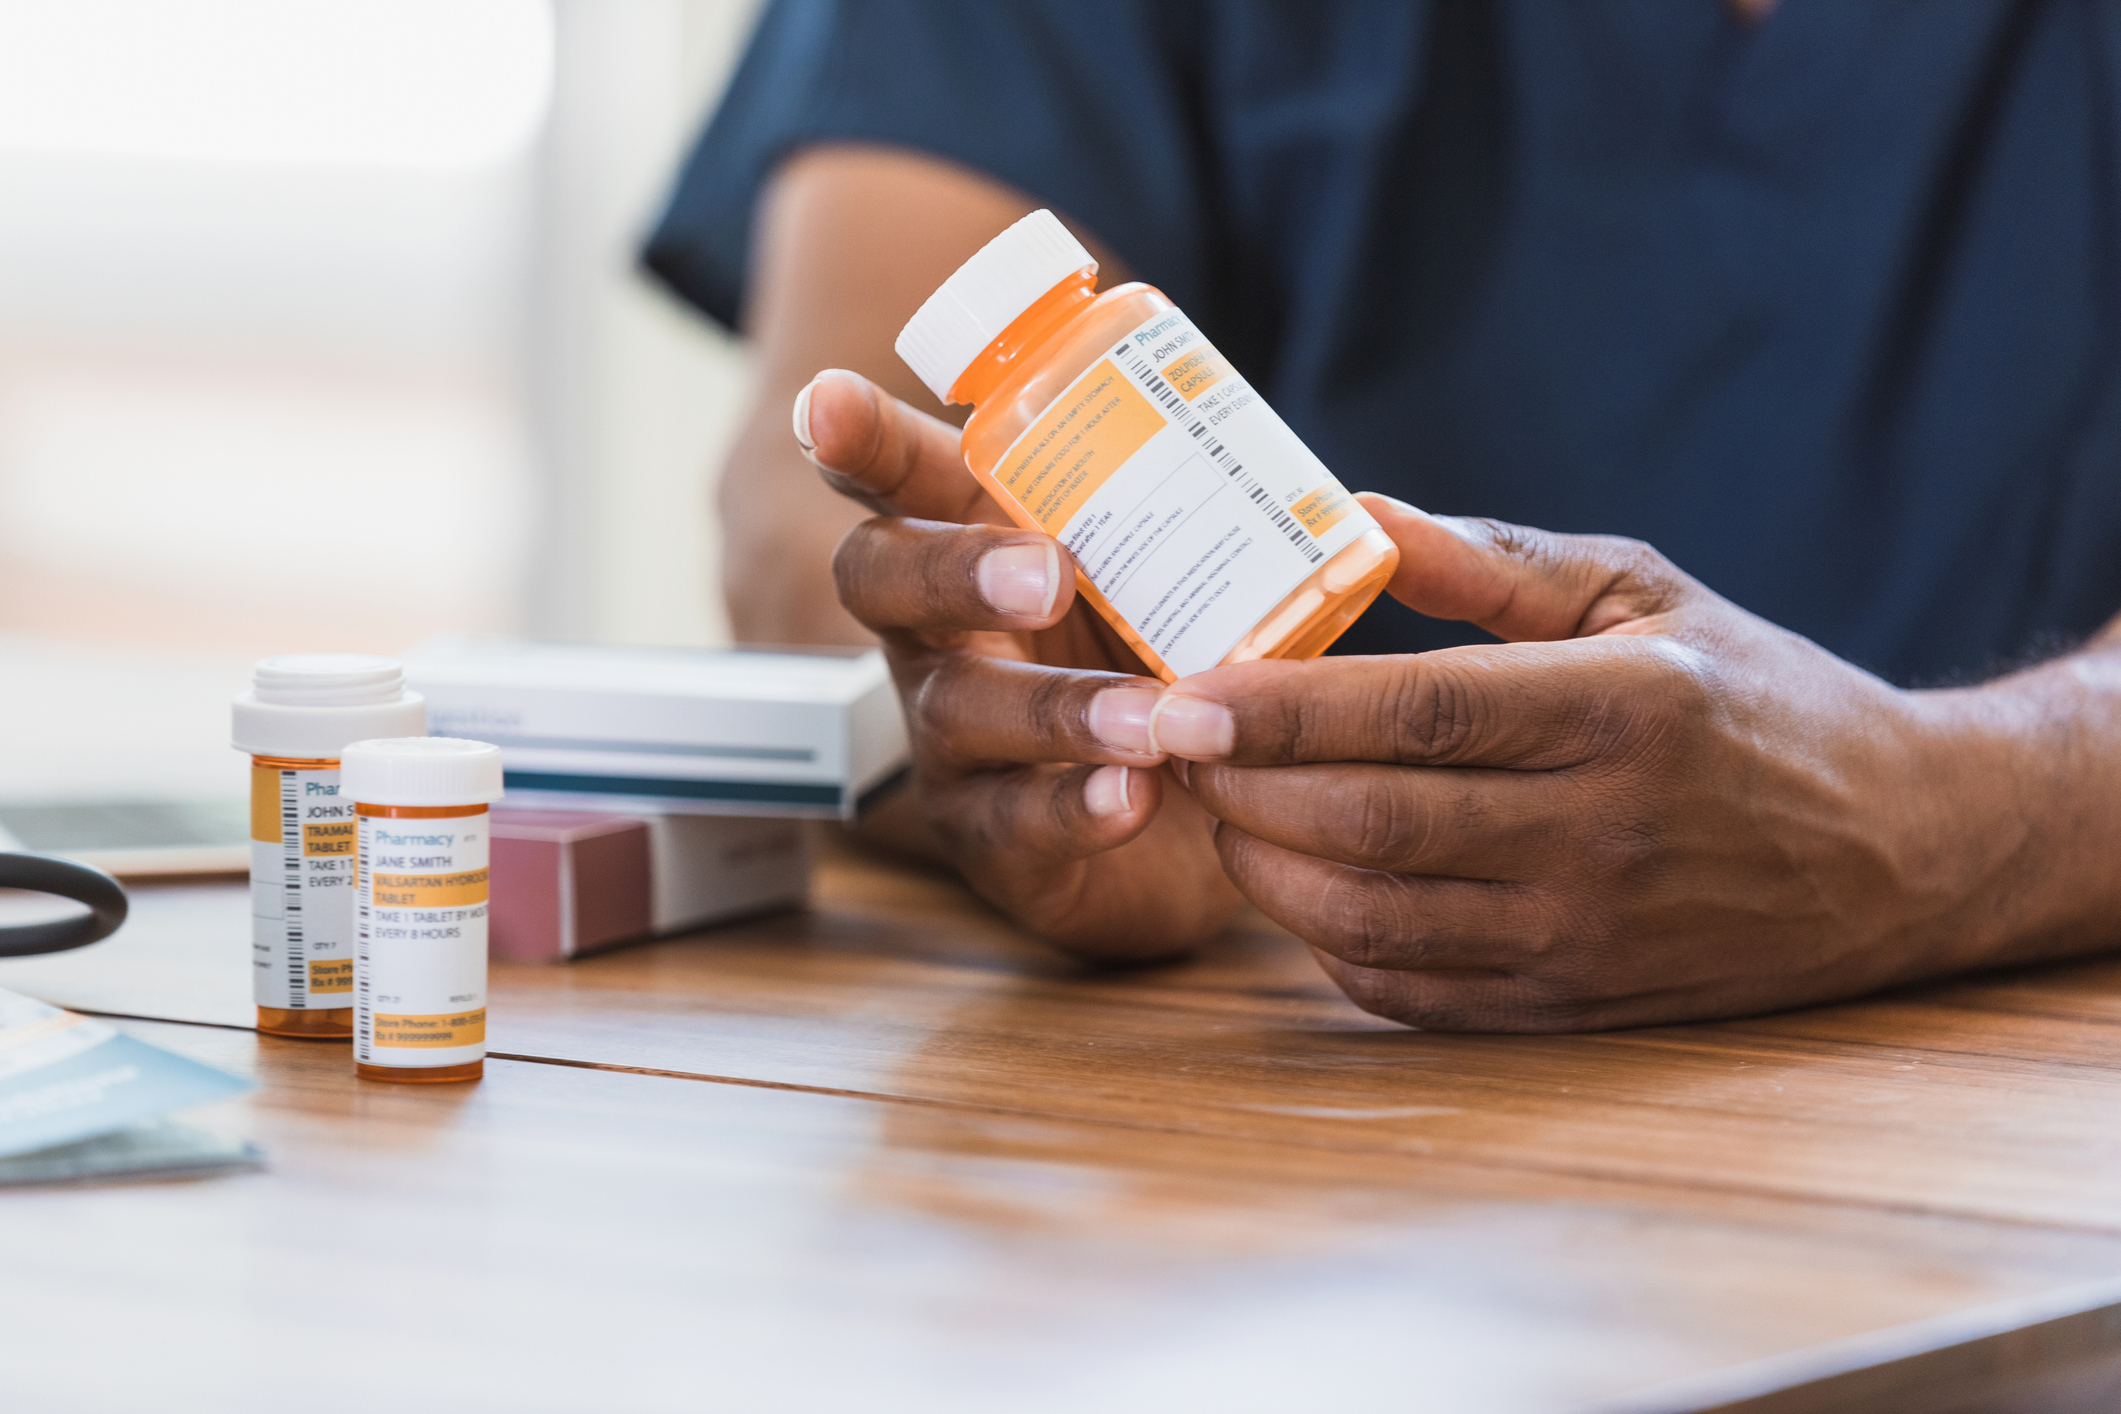 Medication Administration: Best Practices and School Policies